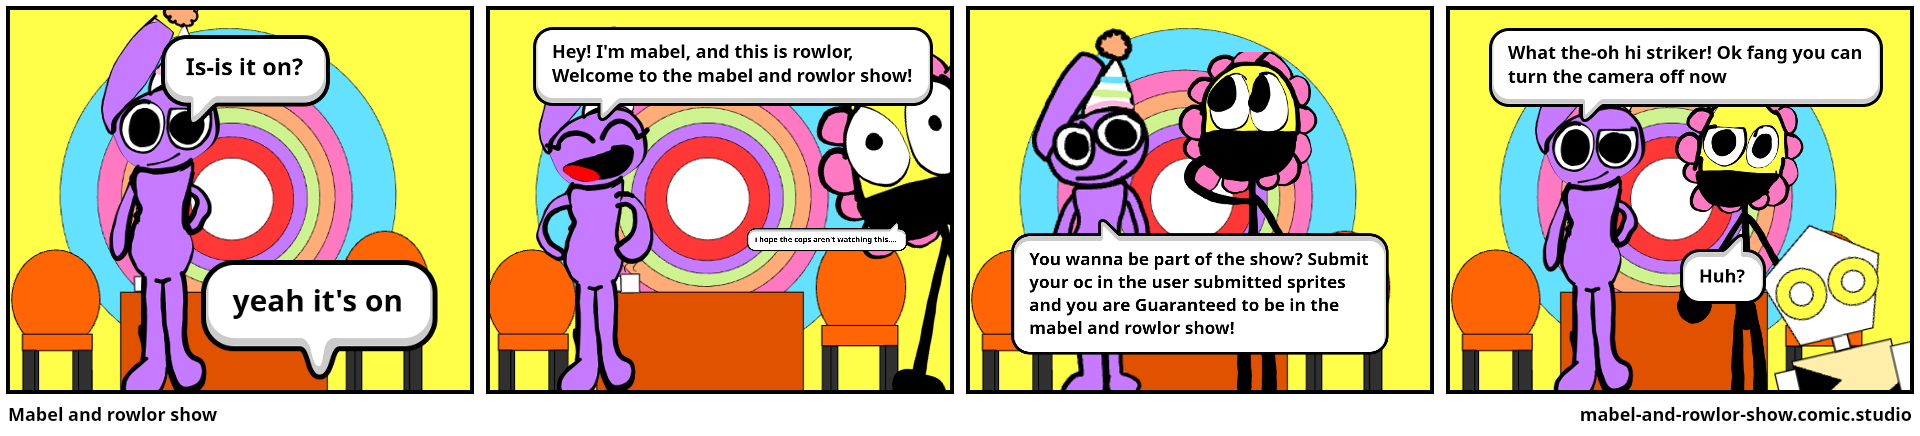 Mabel and rowlor show